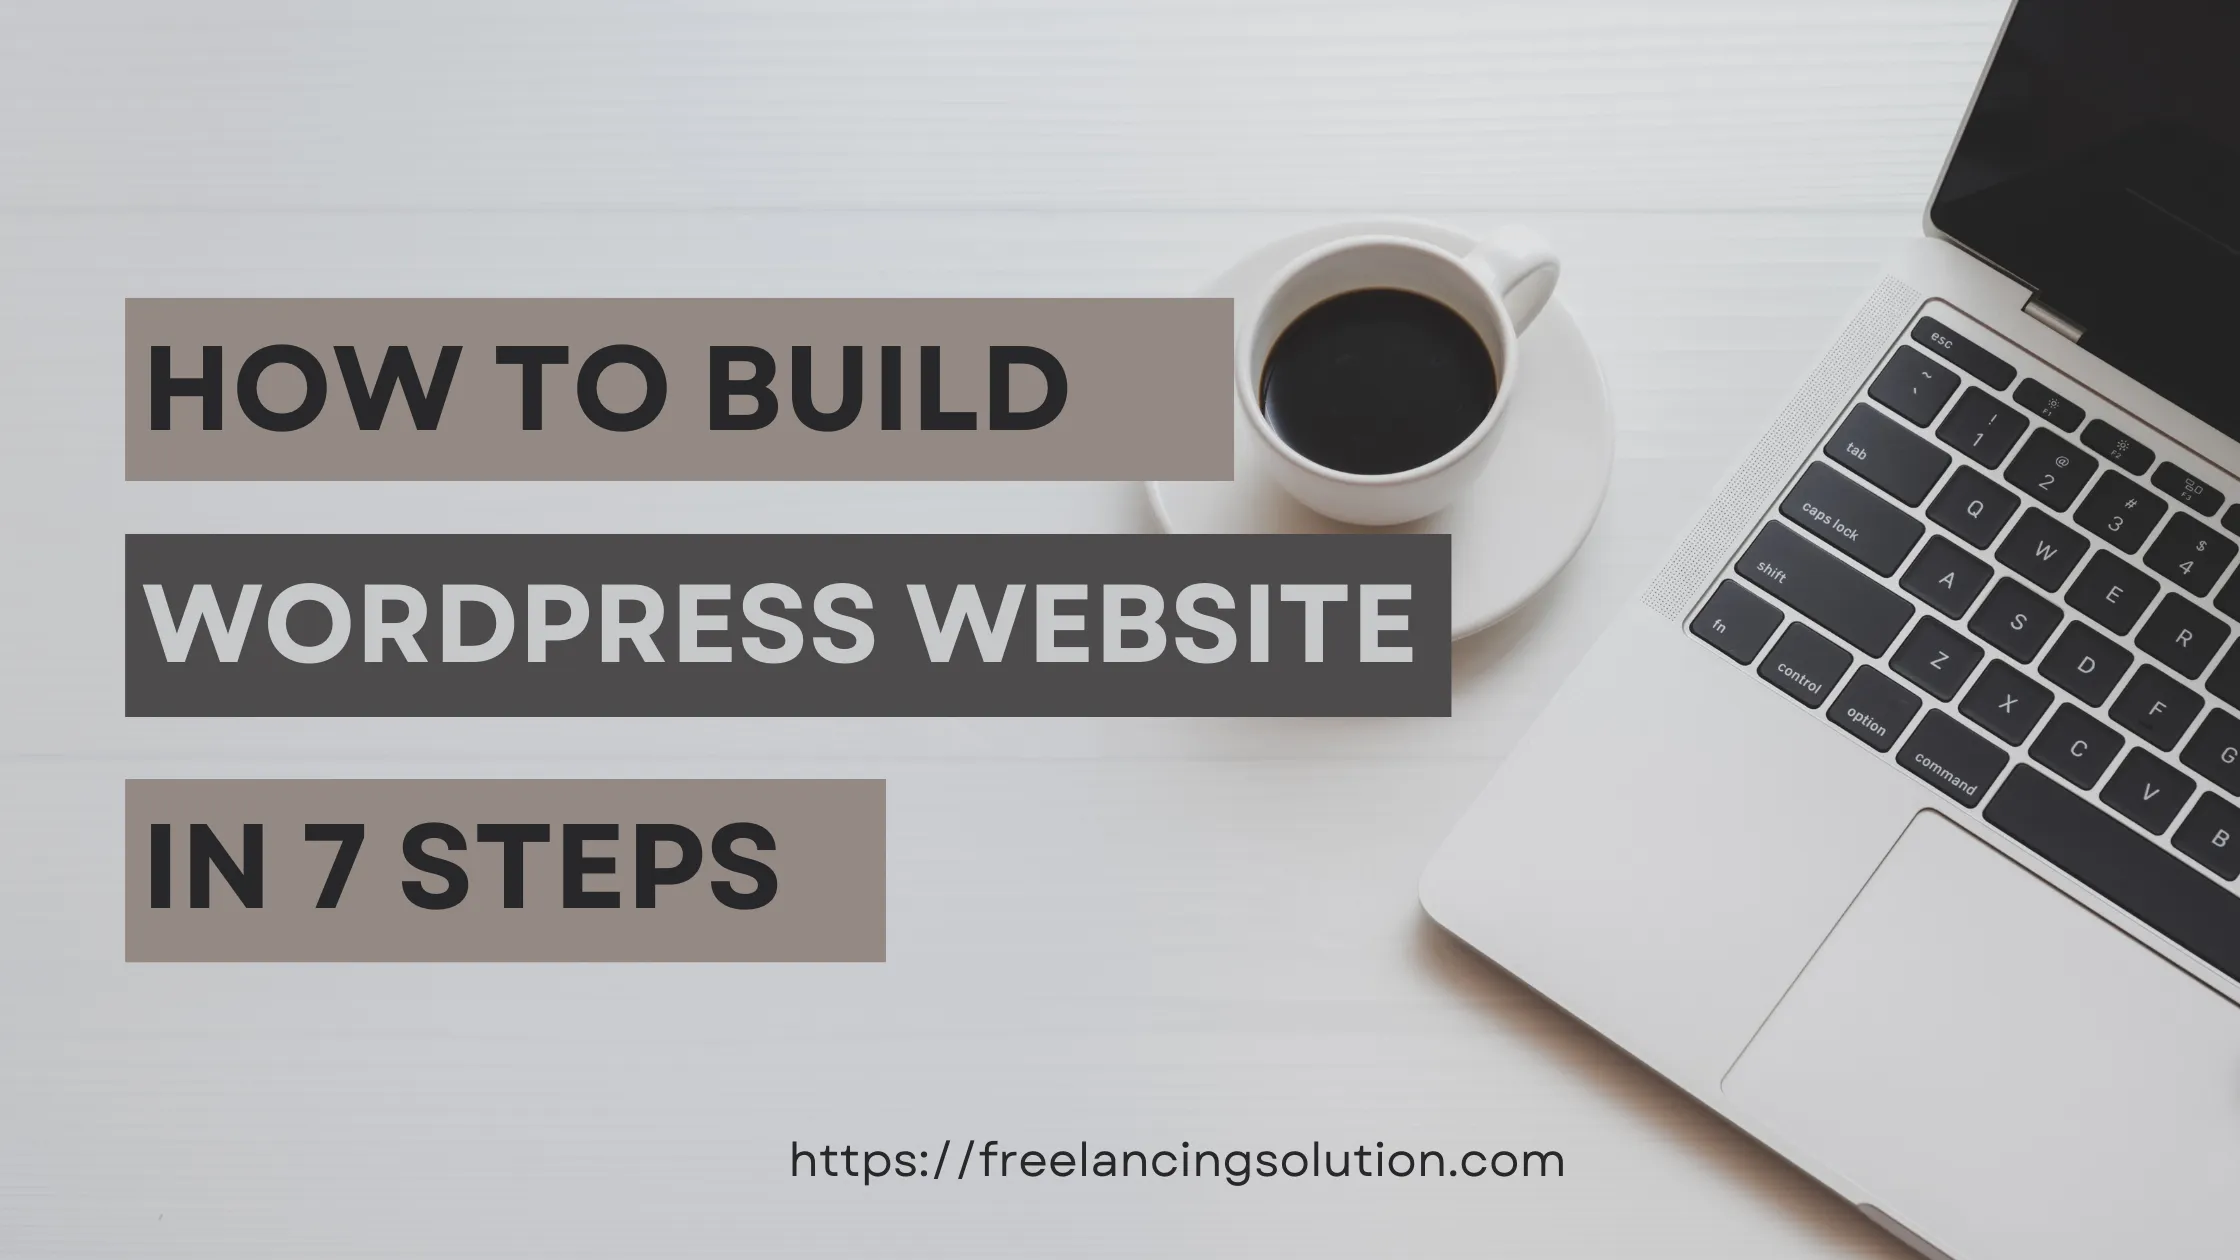 How to Build a WordPress Website in 7 Steps